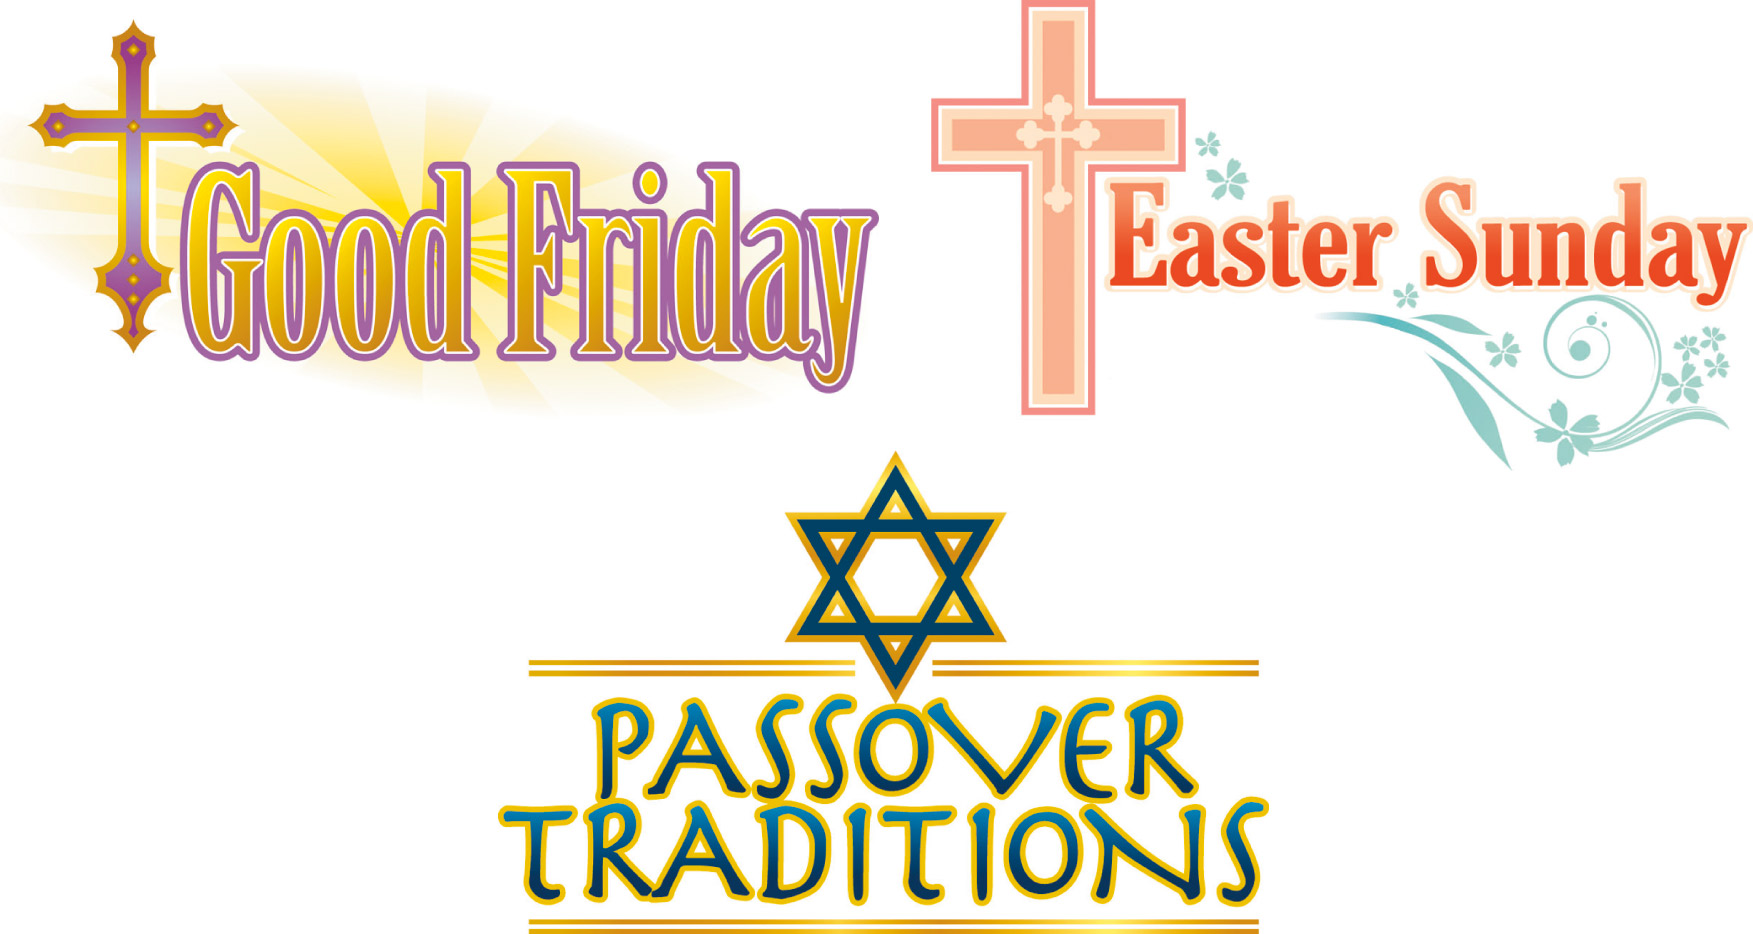 Christian Easter Images - ClipArt Best